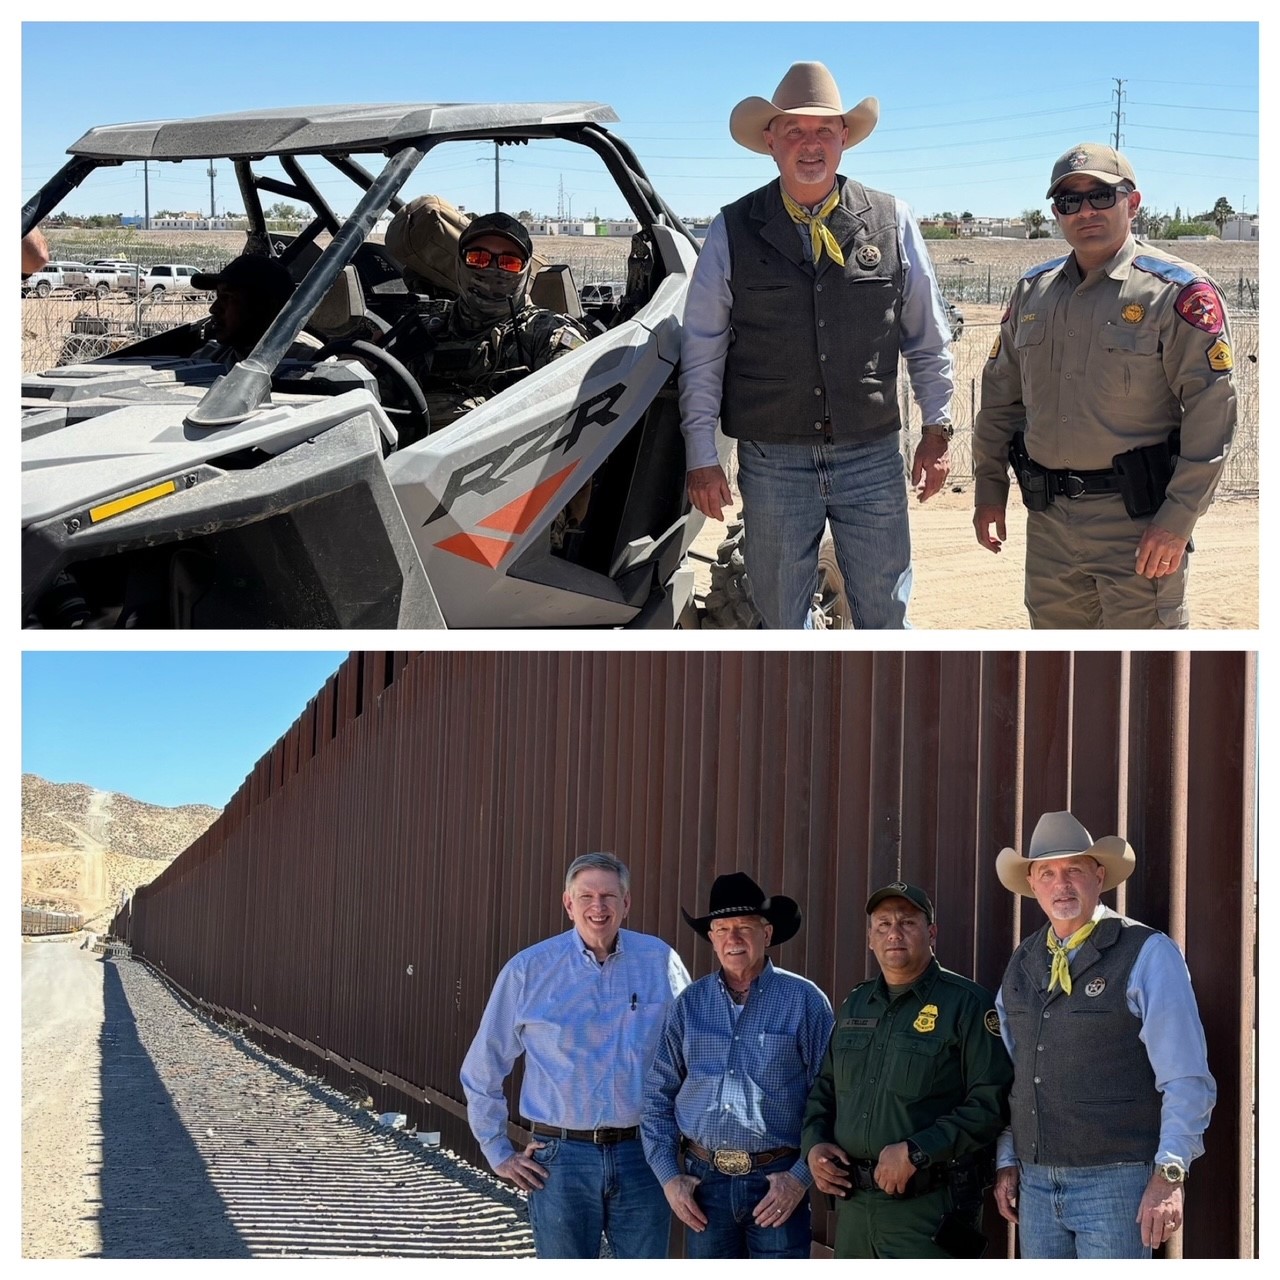  Sheriffs meet to discuss the ongoing debacle and national security situation at our southern border.